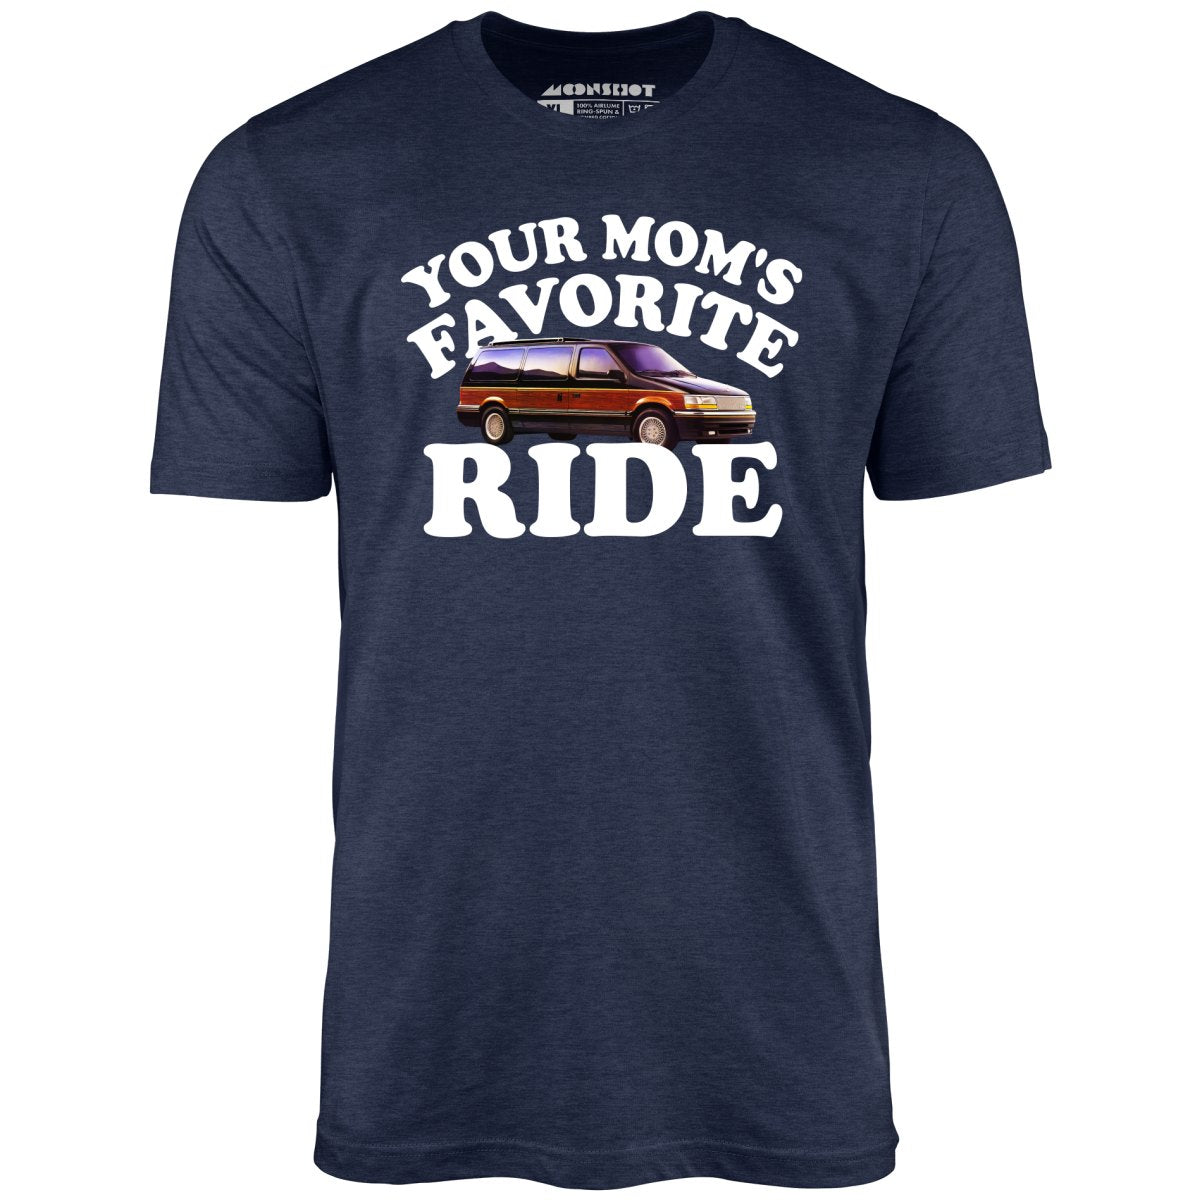 Your Mom's Favorite Ride - Unisex T-Shirt